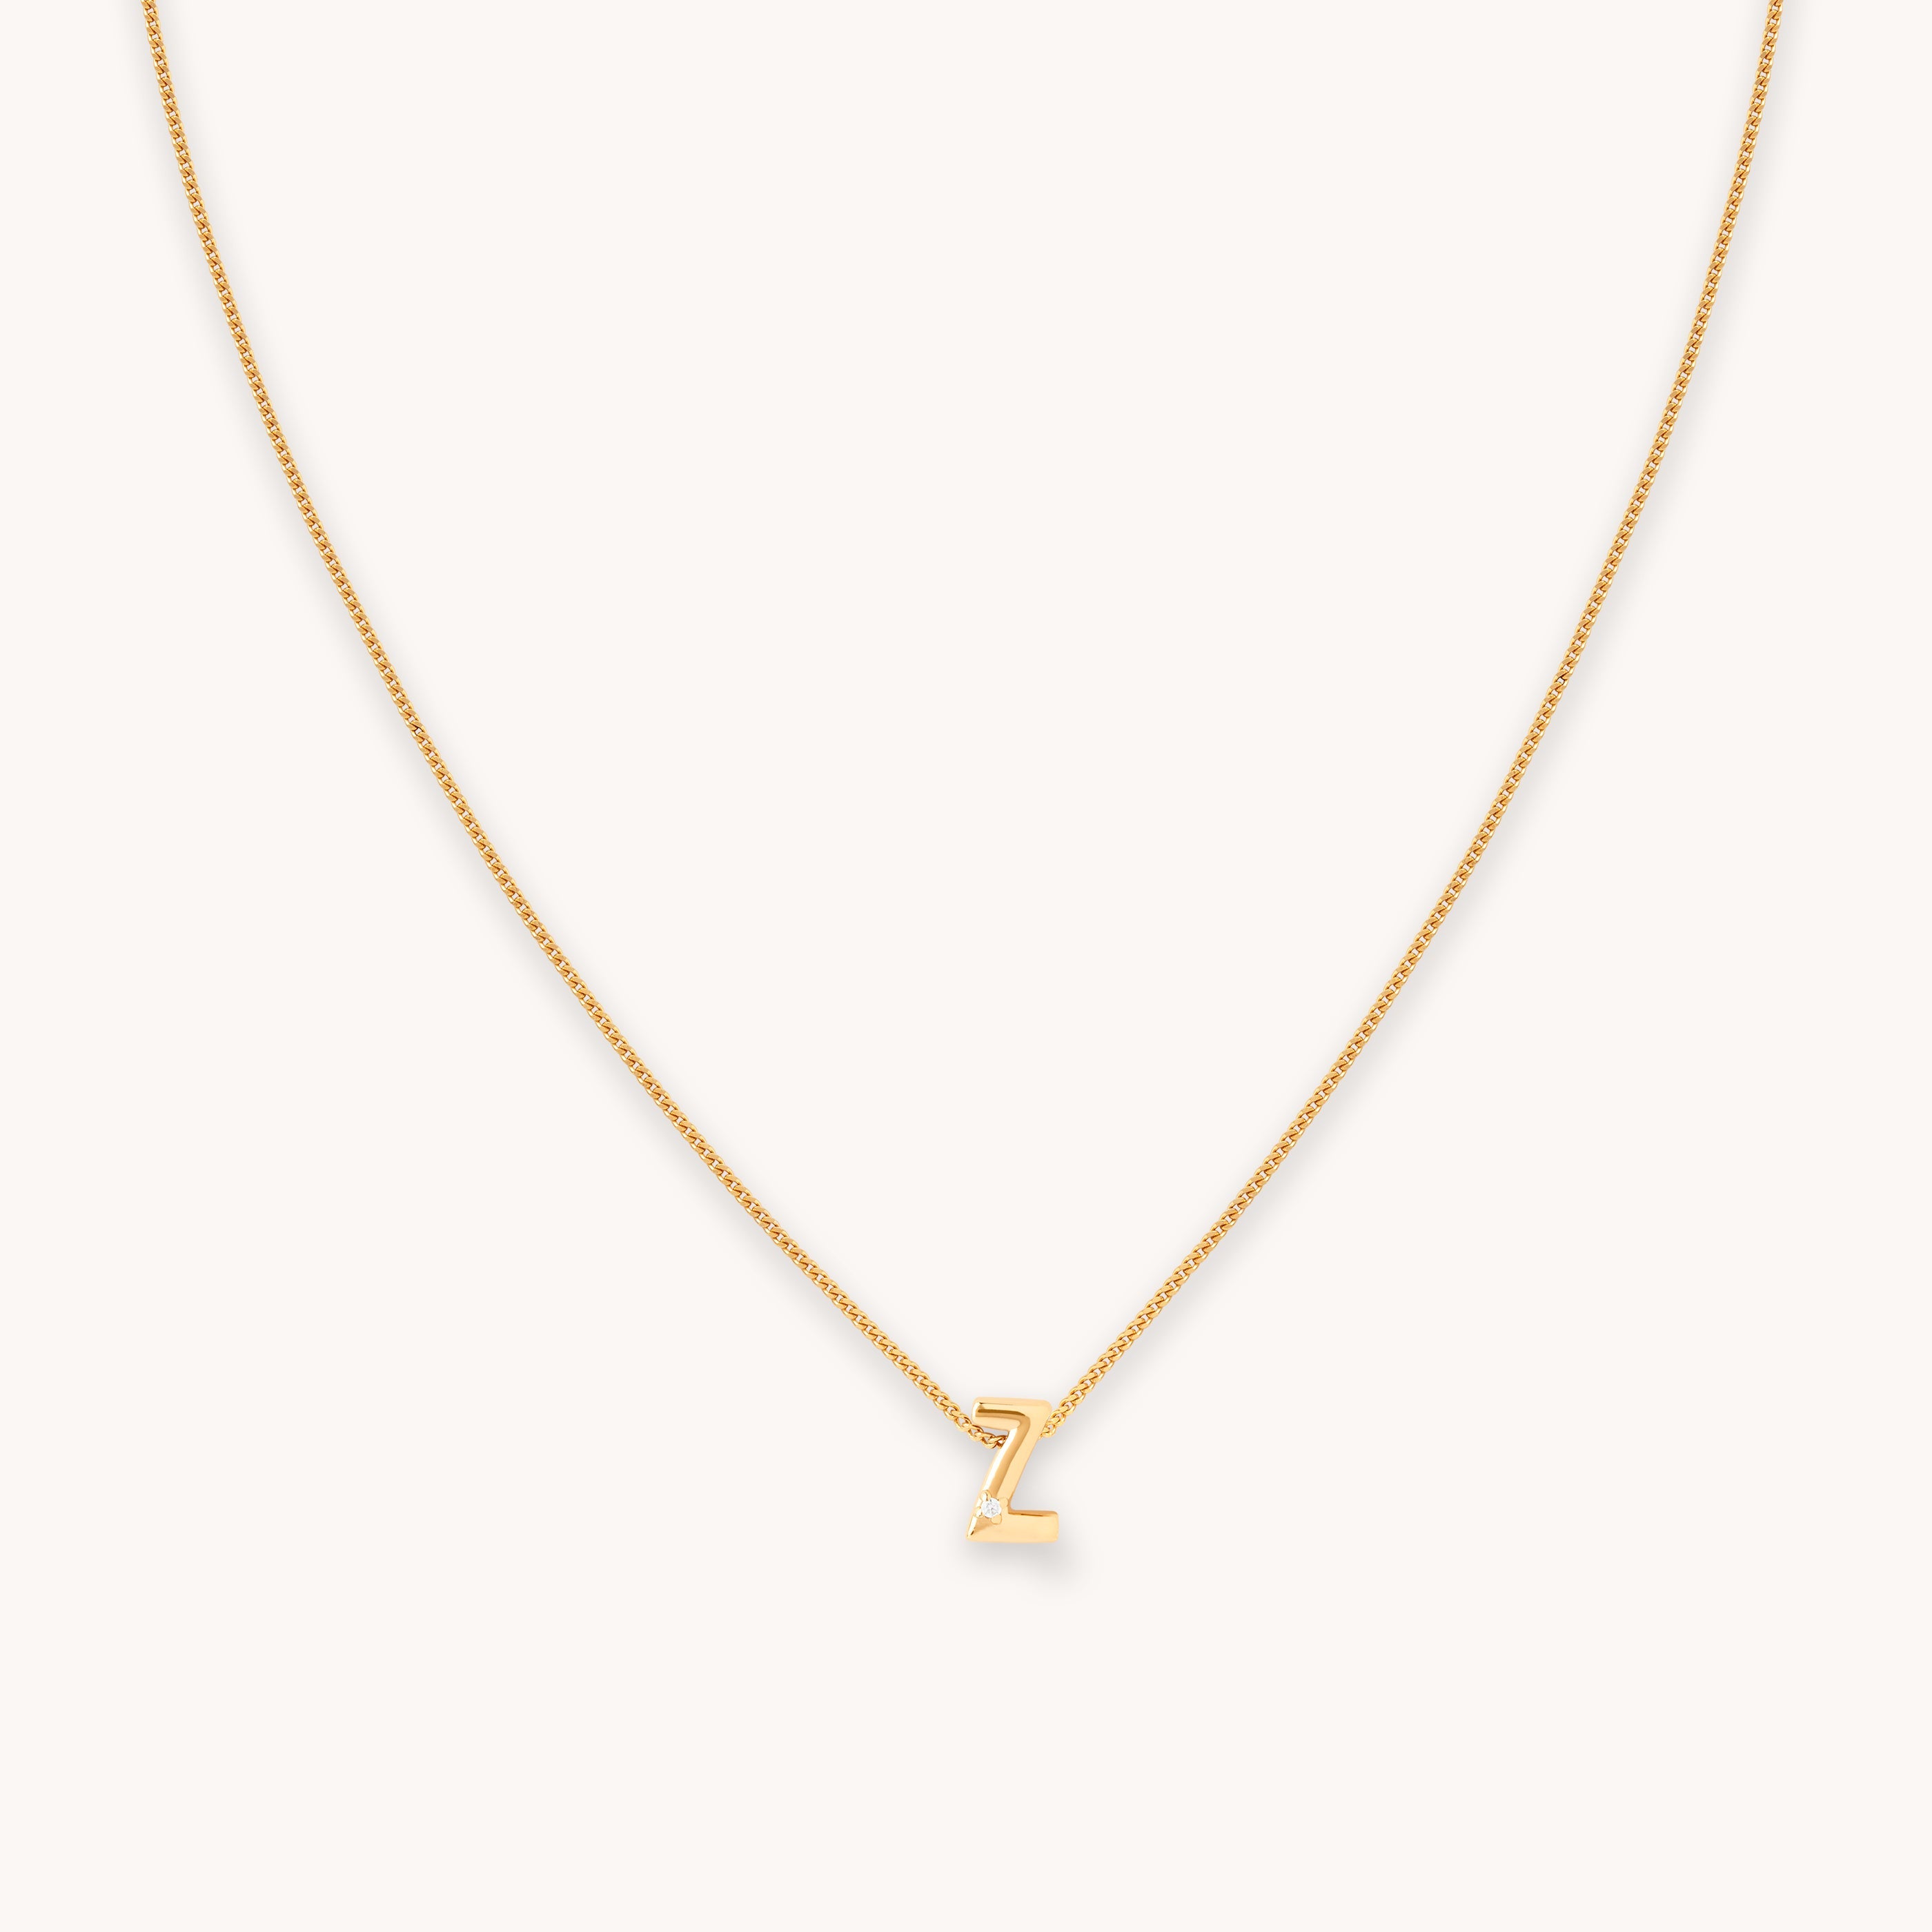 Z Initial Pendant Necklace in Gold